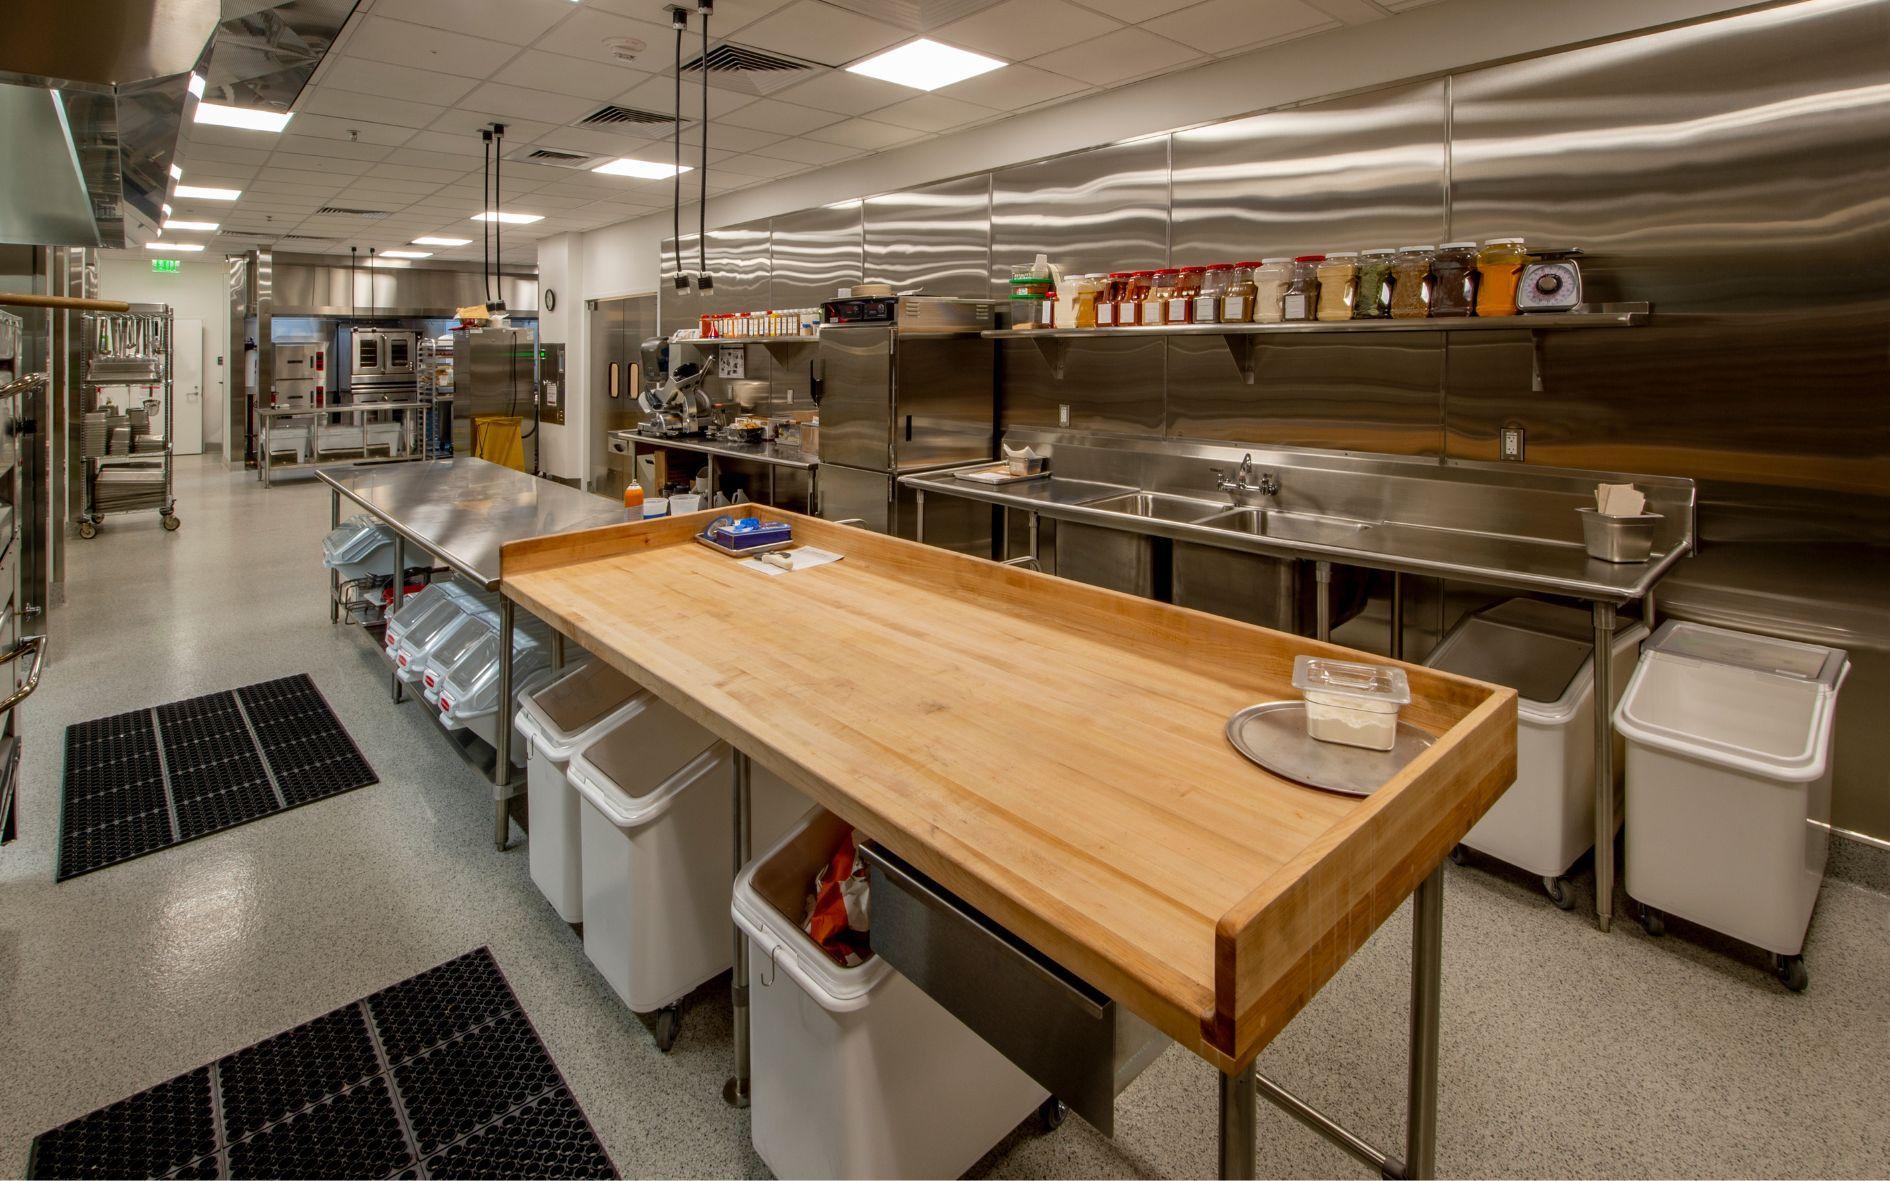 Choosing The Right Floor Mop For Your Commercial Kitchen